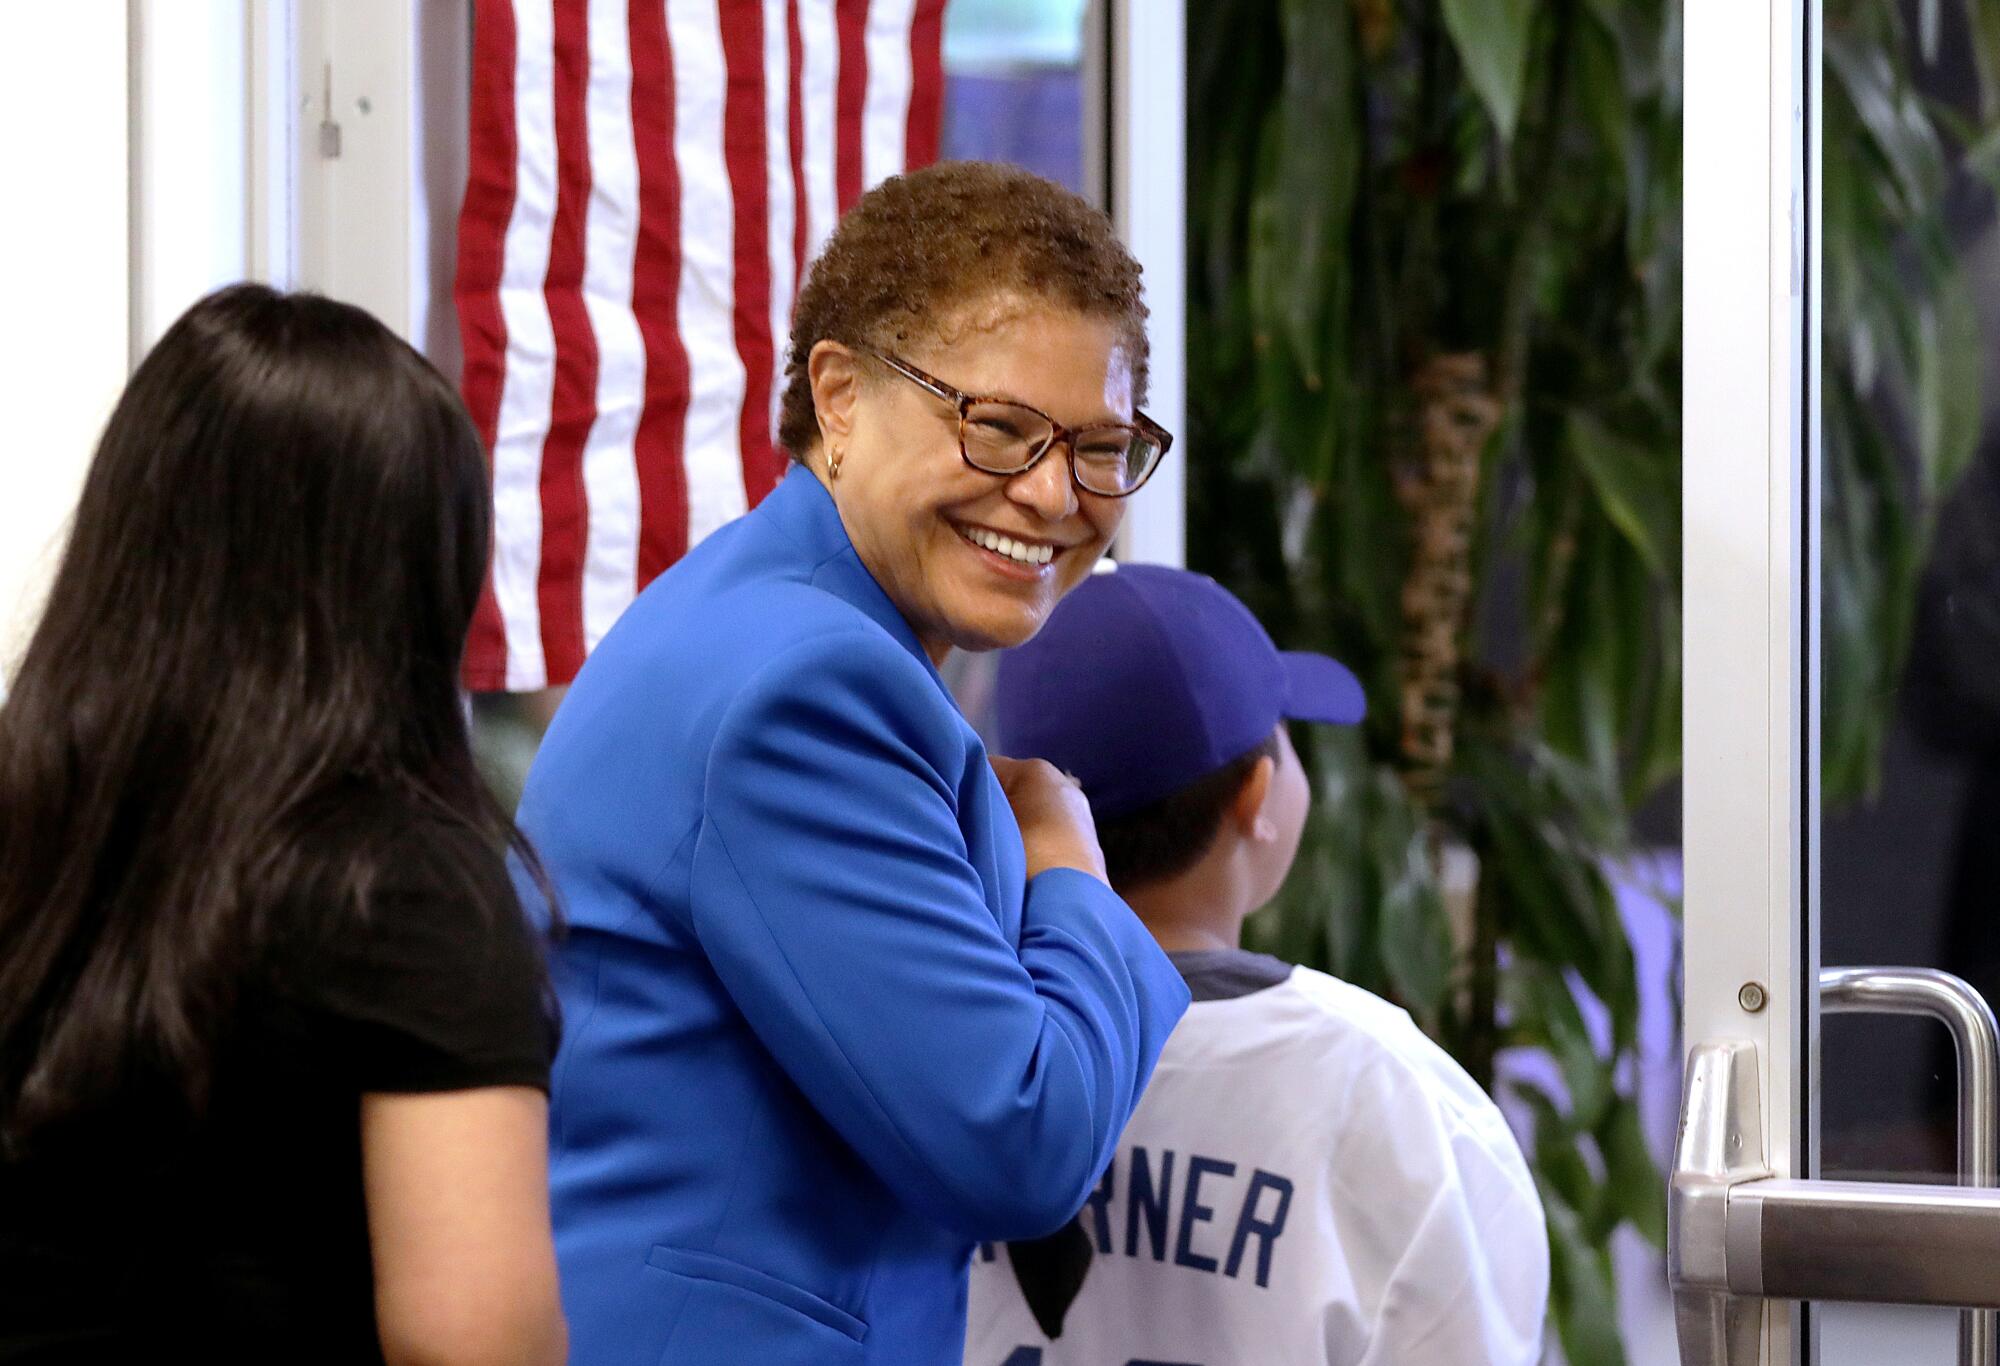 Karen Bass leaving a polling place with a young woman and boy